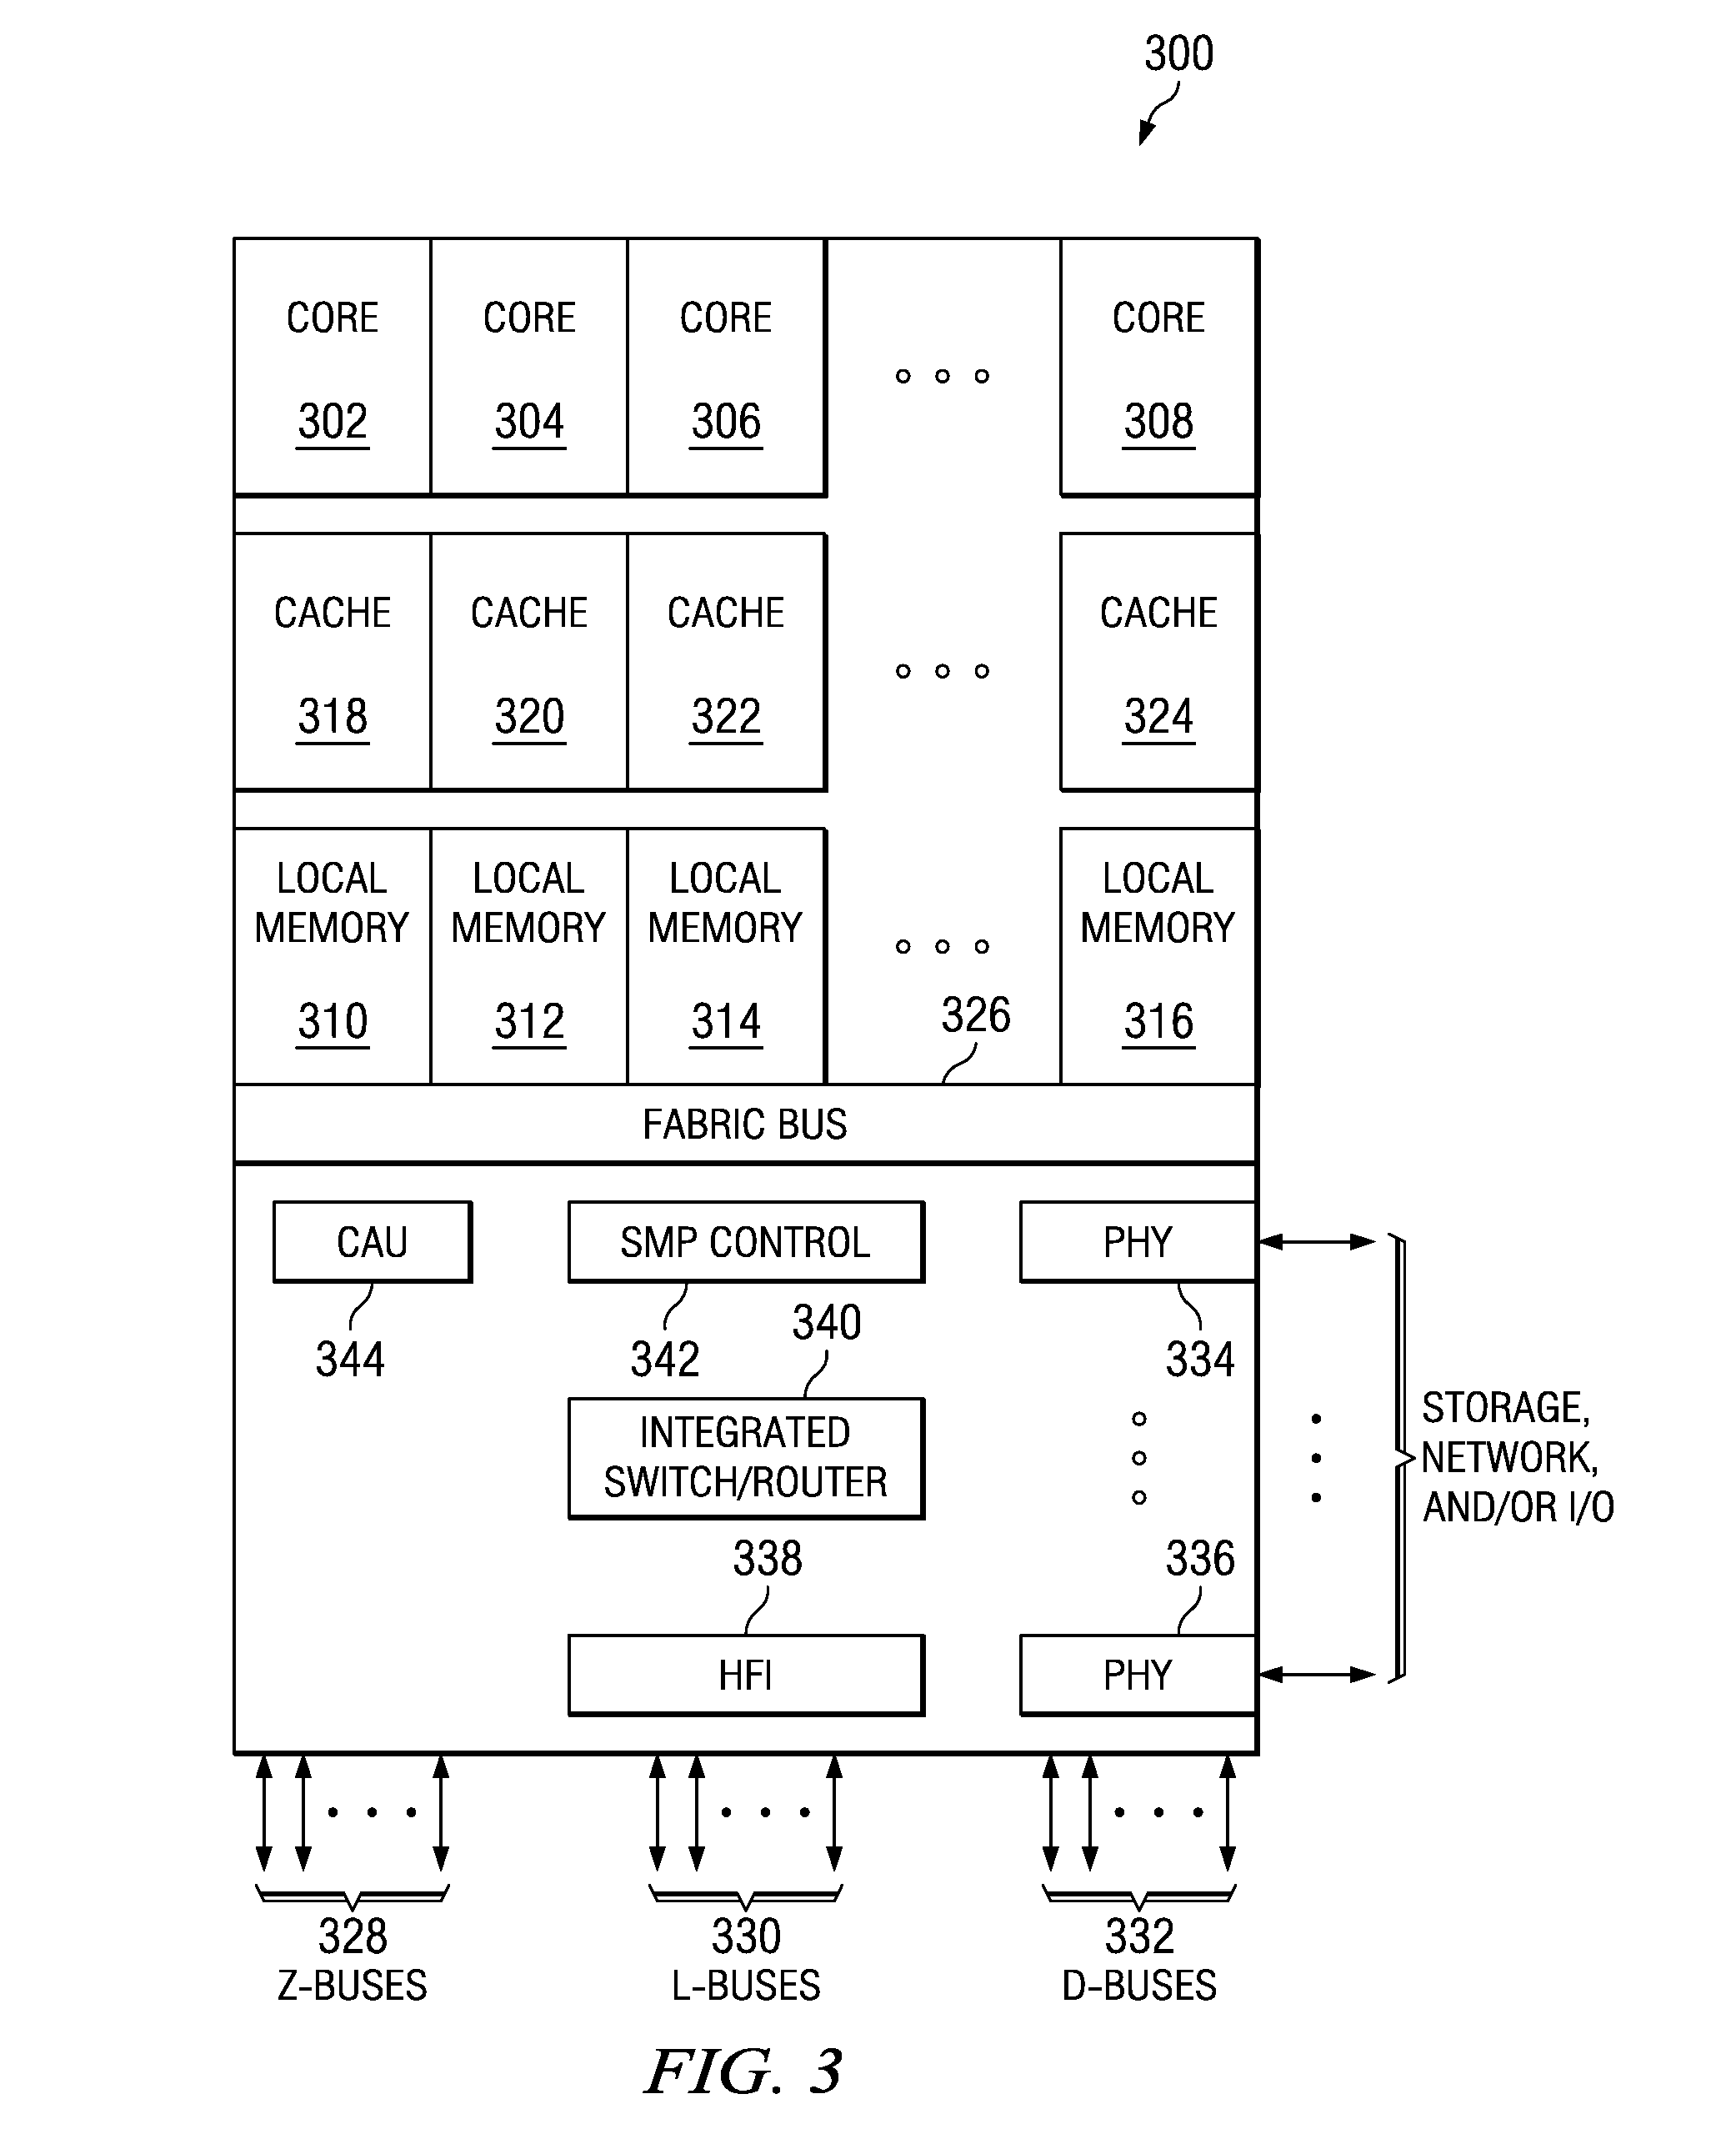 System and Method for Dynamically Supporting Indirect Routing Within a Multi-Tiered Full-Graph Interconnect Architecture